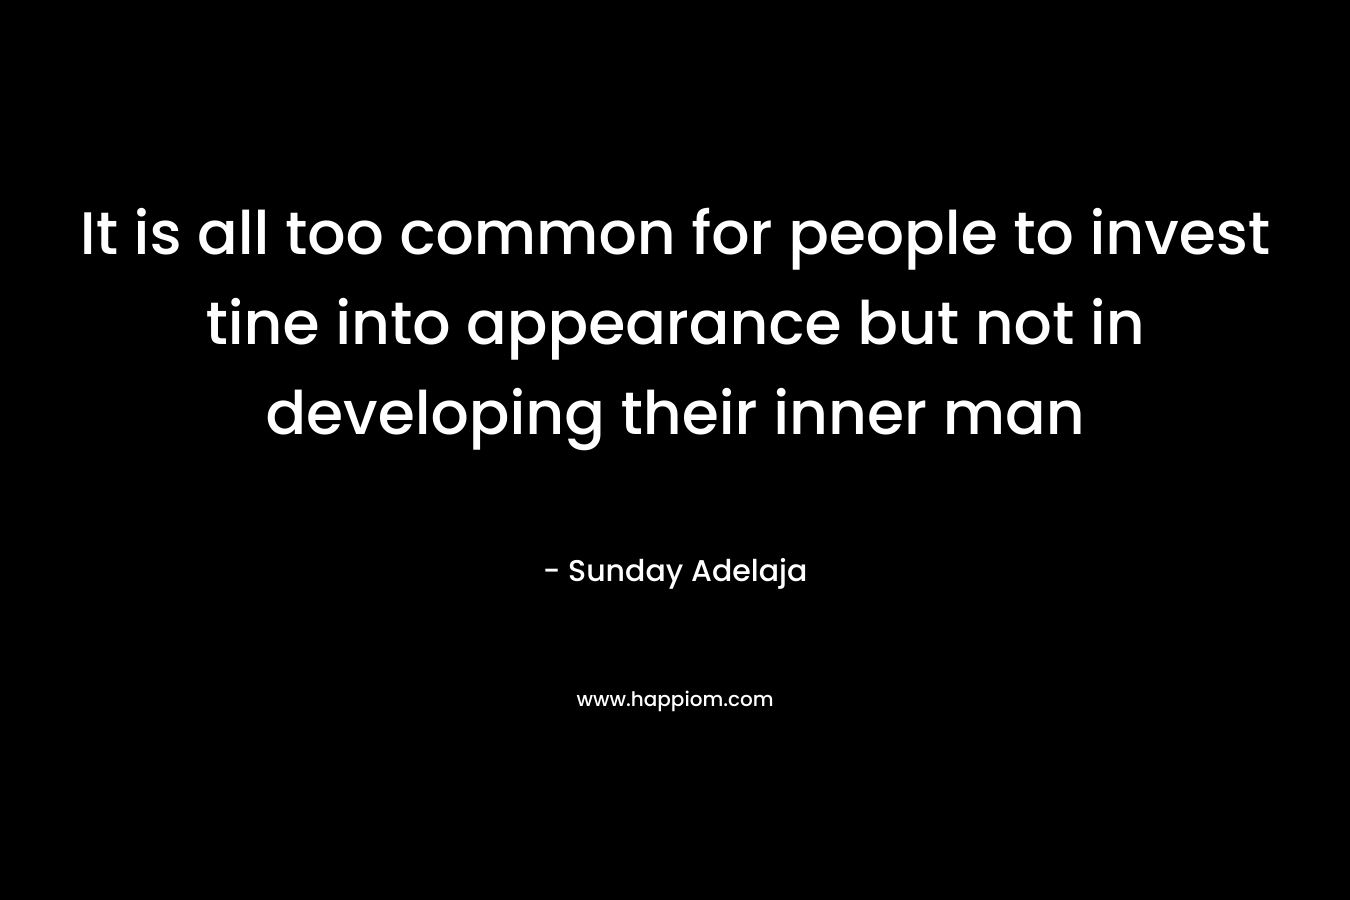 It is all too common for people to invest tine into appearance but not in developing their inner man – Sunday Adelaja